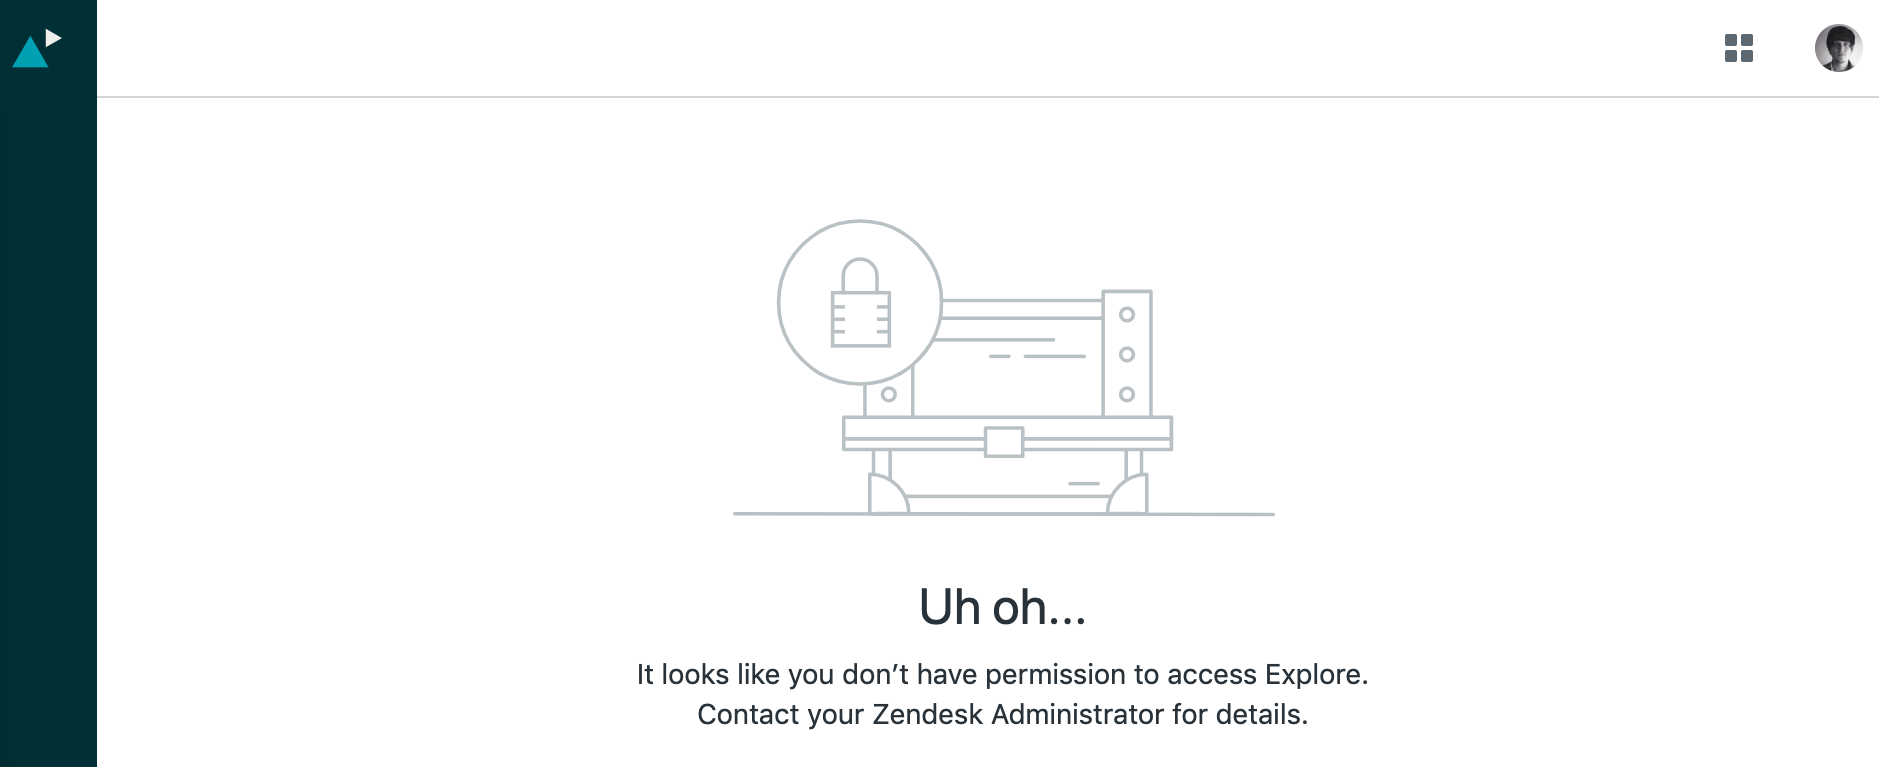 uh_oh_it_looks_like_you_dont_have_permission_to_access_explore.png